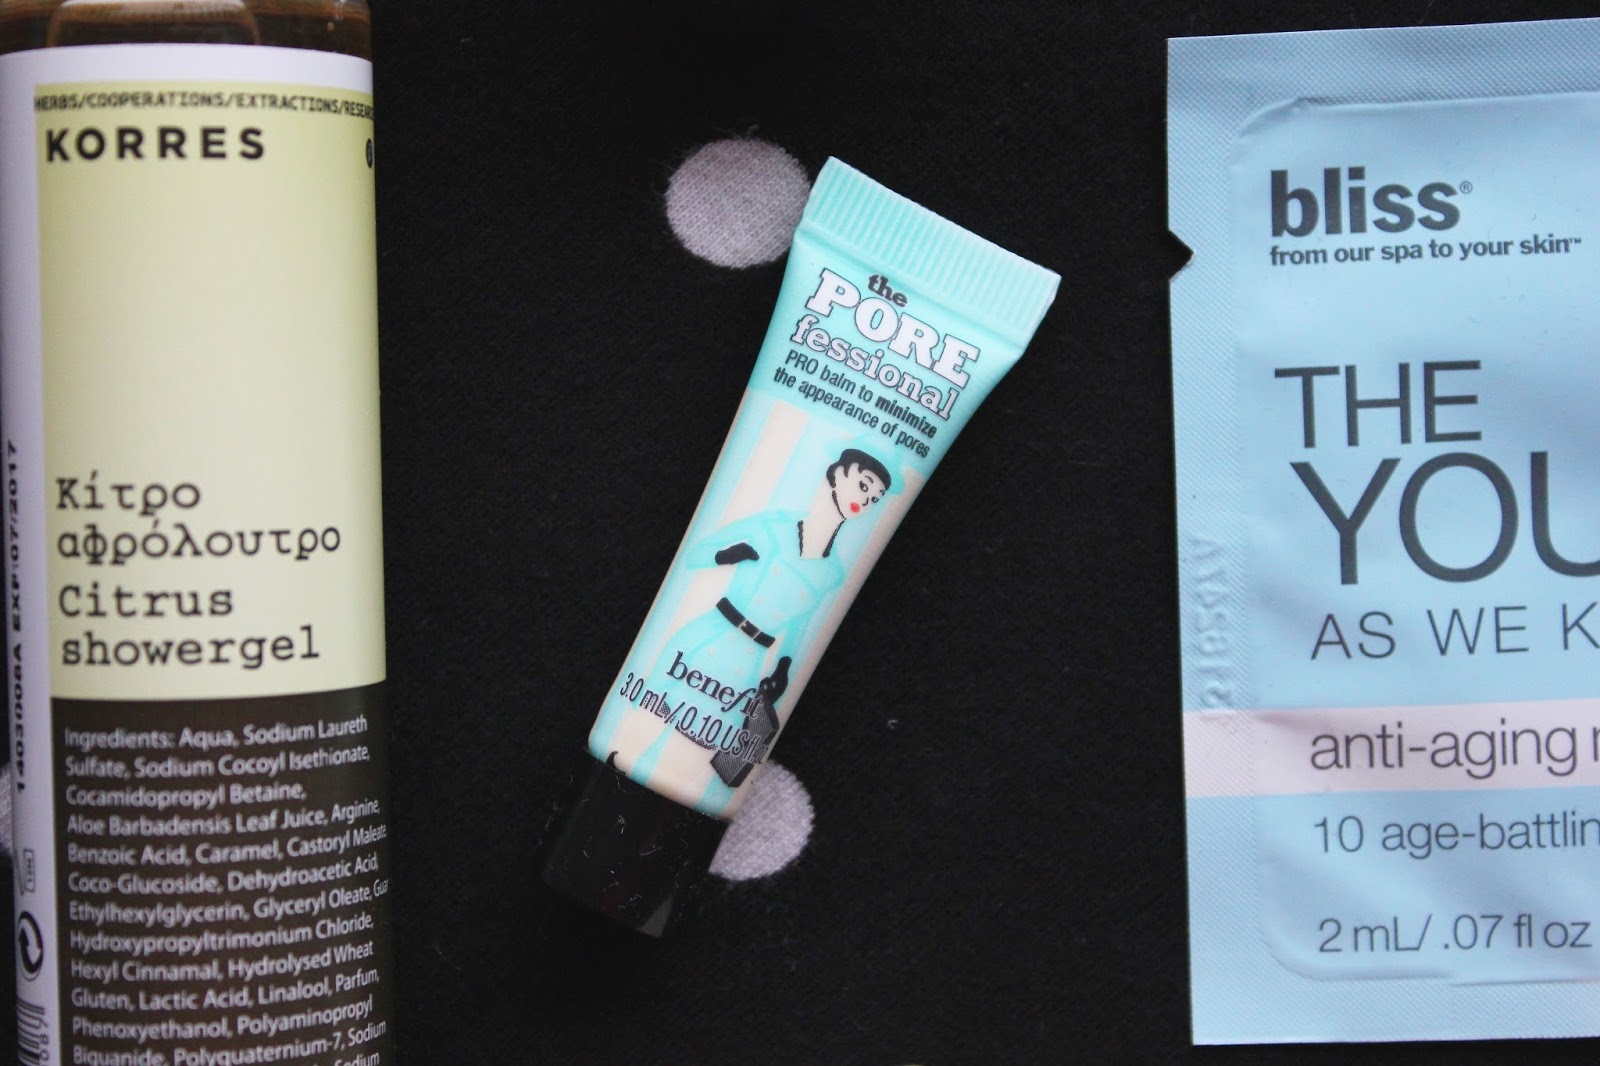 Georgie Minter-Brown, actress, blogger, beauty, reviews, beauty reviews, samples, Korres, bliss skincare, blearier cosmetics, benefit, the porefessional, paco rabanne olympea, perfume, makeup, skincare, haircare, beauty works